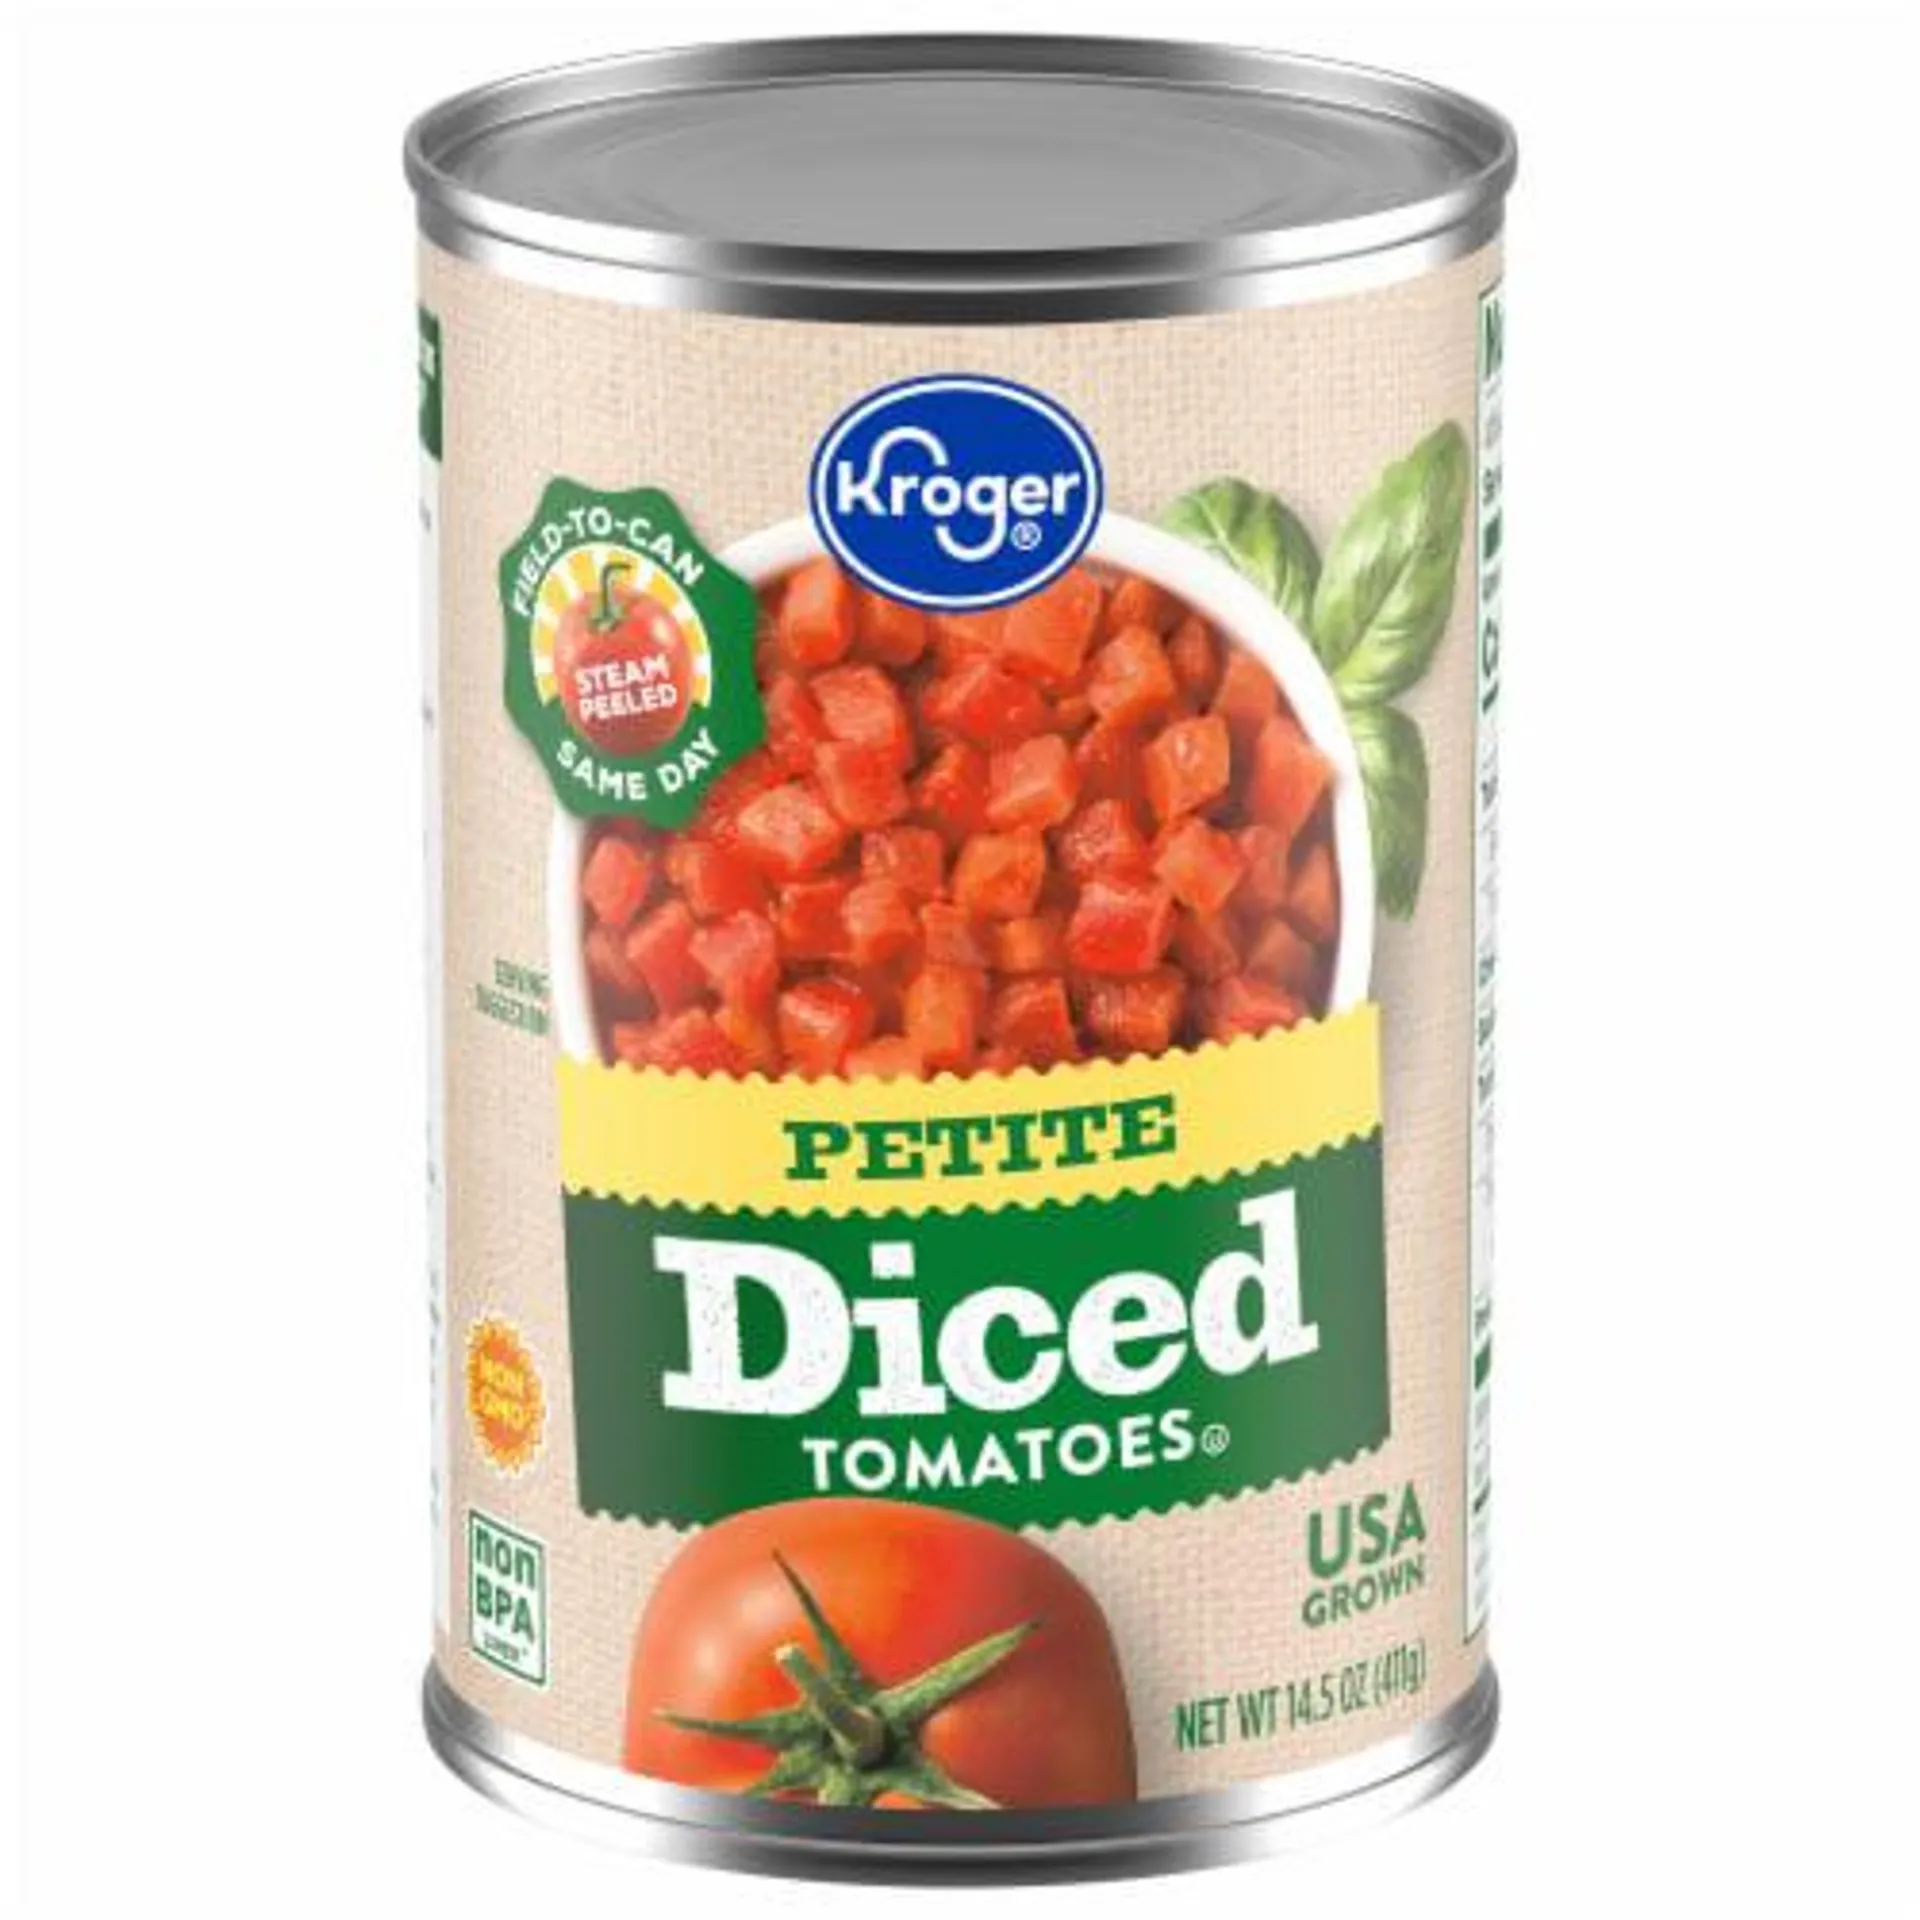 Kroger® Petite Diced Tomatoes in Tomato Juice